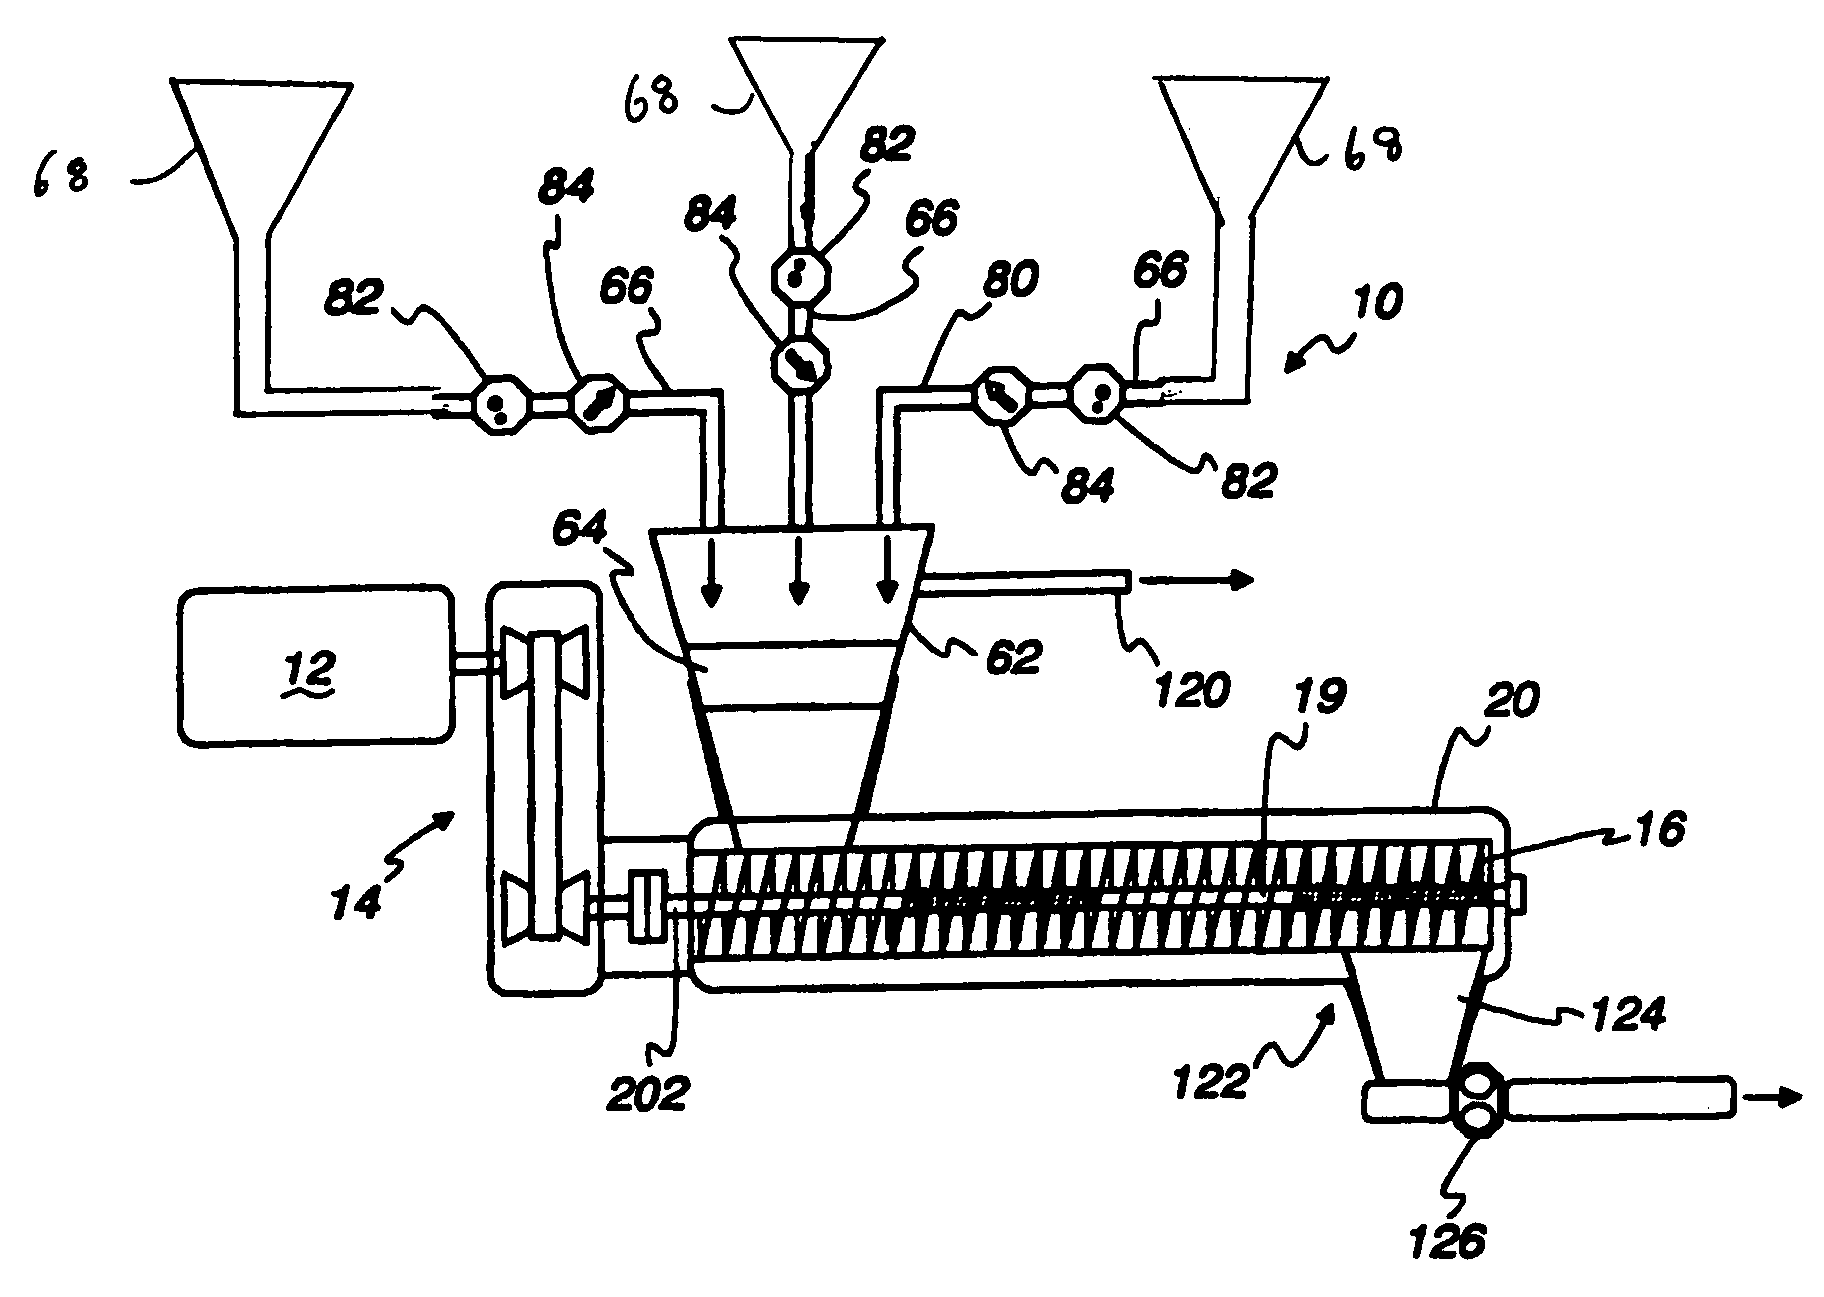 Integrated continuous meat processing system